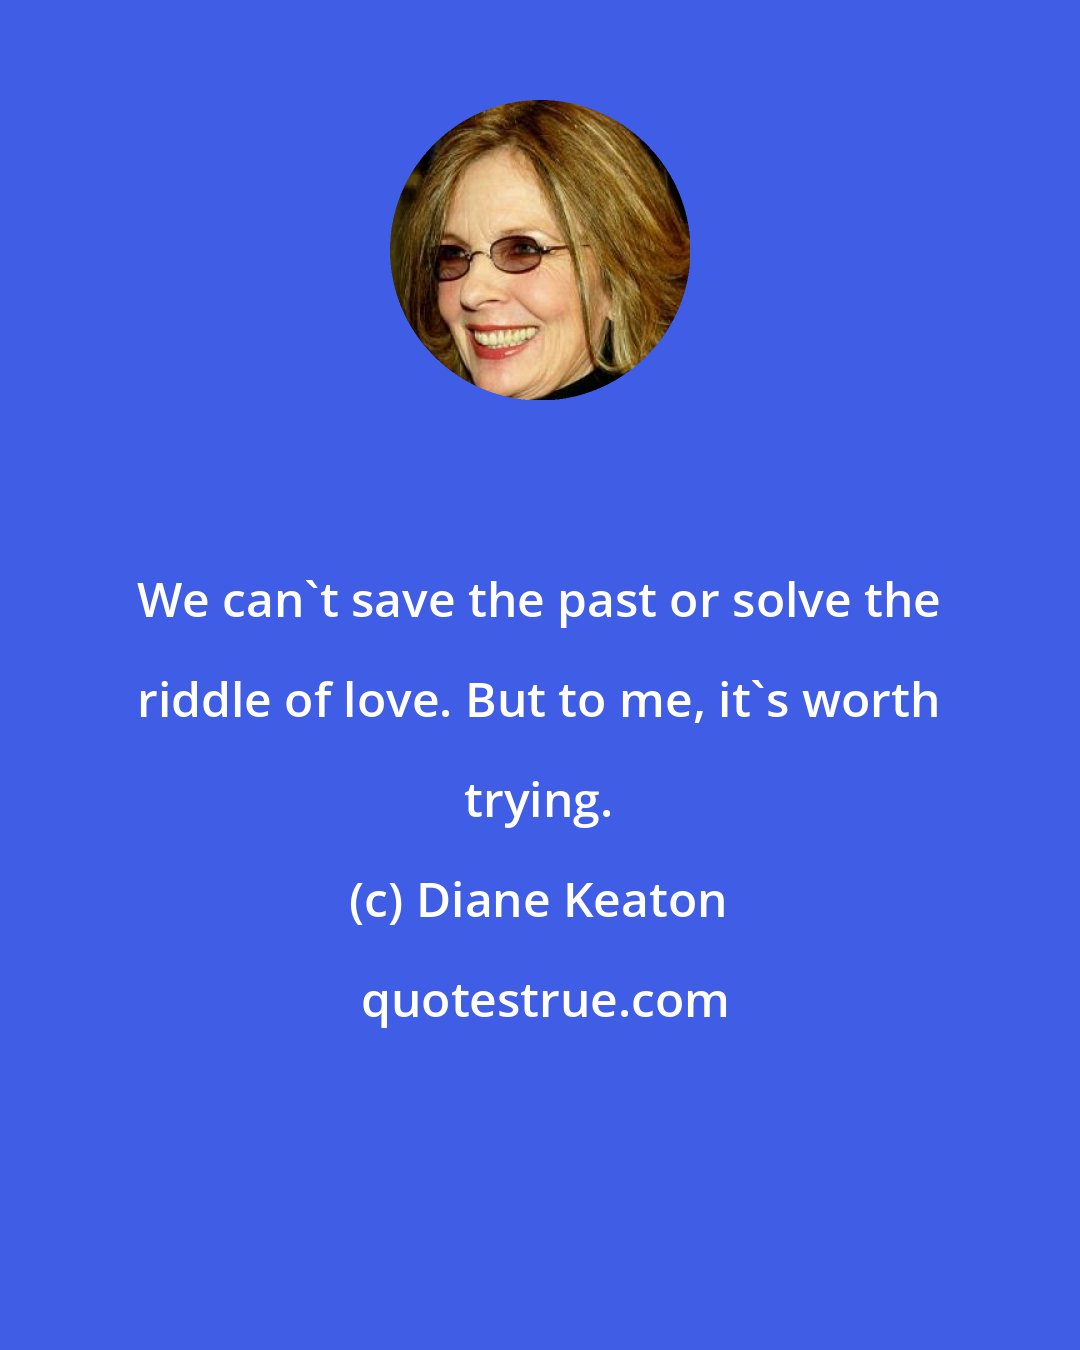 Diane Keaton: We can't save the past or solve the riddle of love. But to me, it's worth trying.